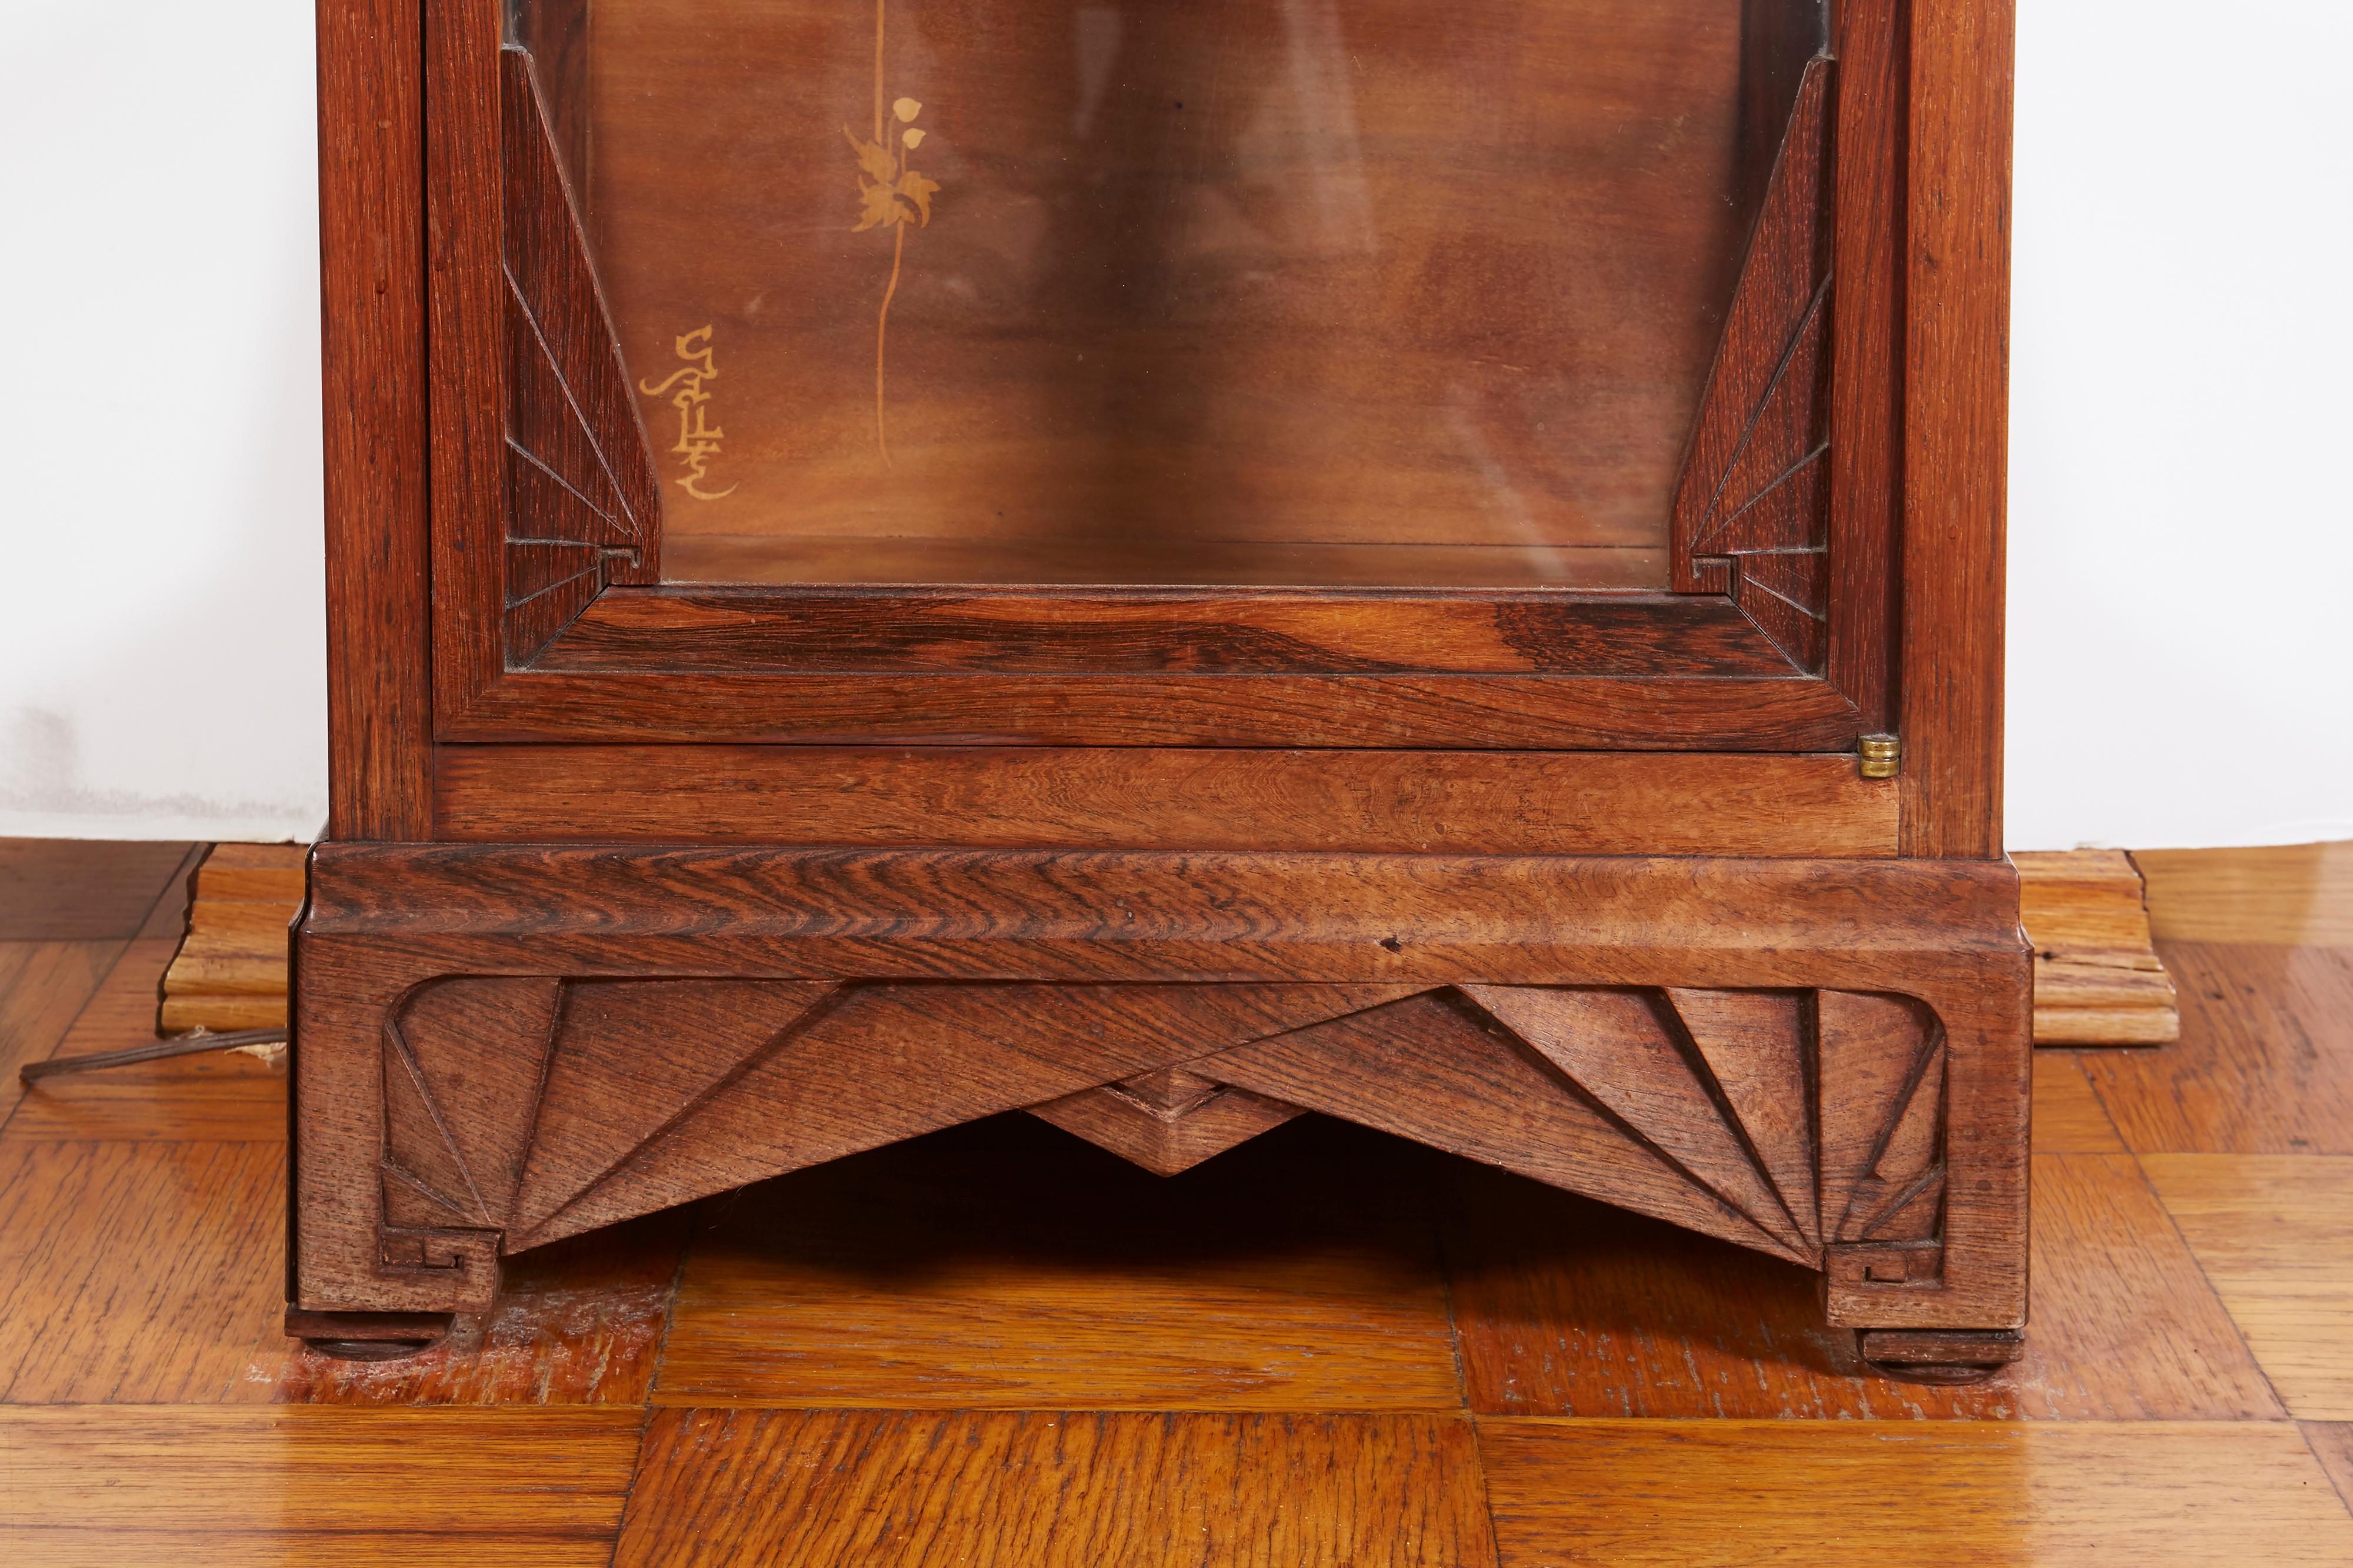 French Art Nouveau inlaid vitrine by Emille Galle, signed.
Measures: Width 19